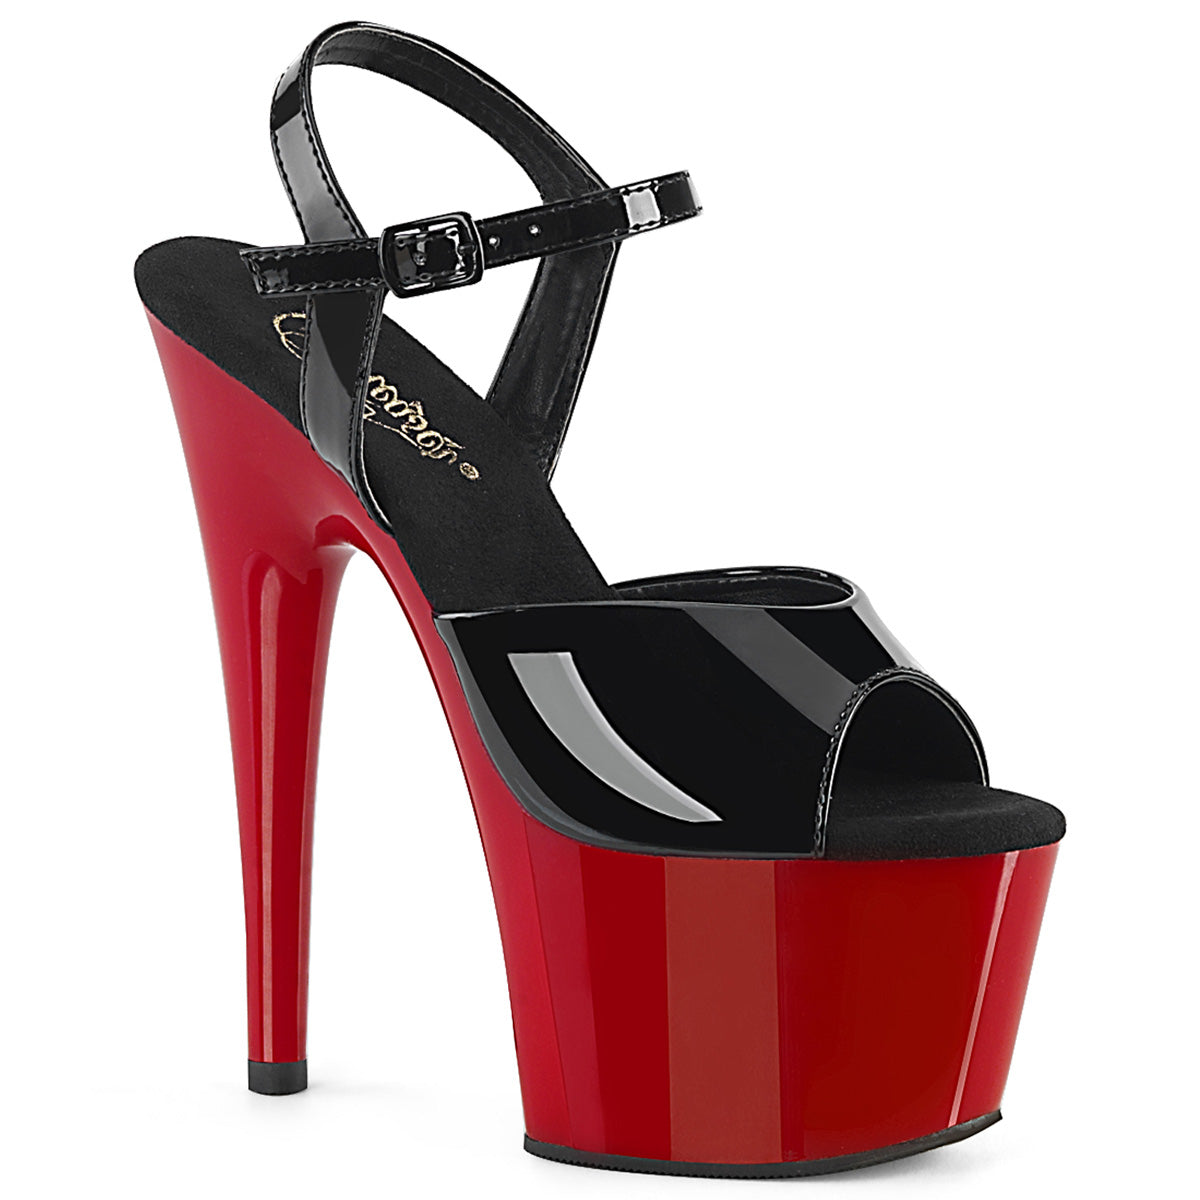 Pleaser Adore-709 in Black Patent/Red – Pleaser Shoes